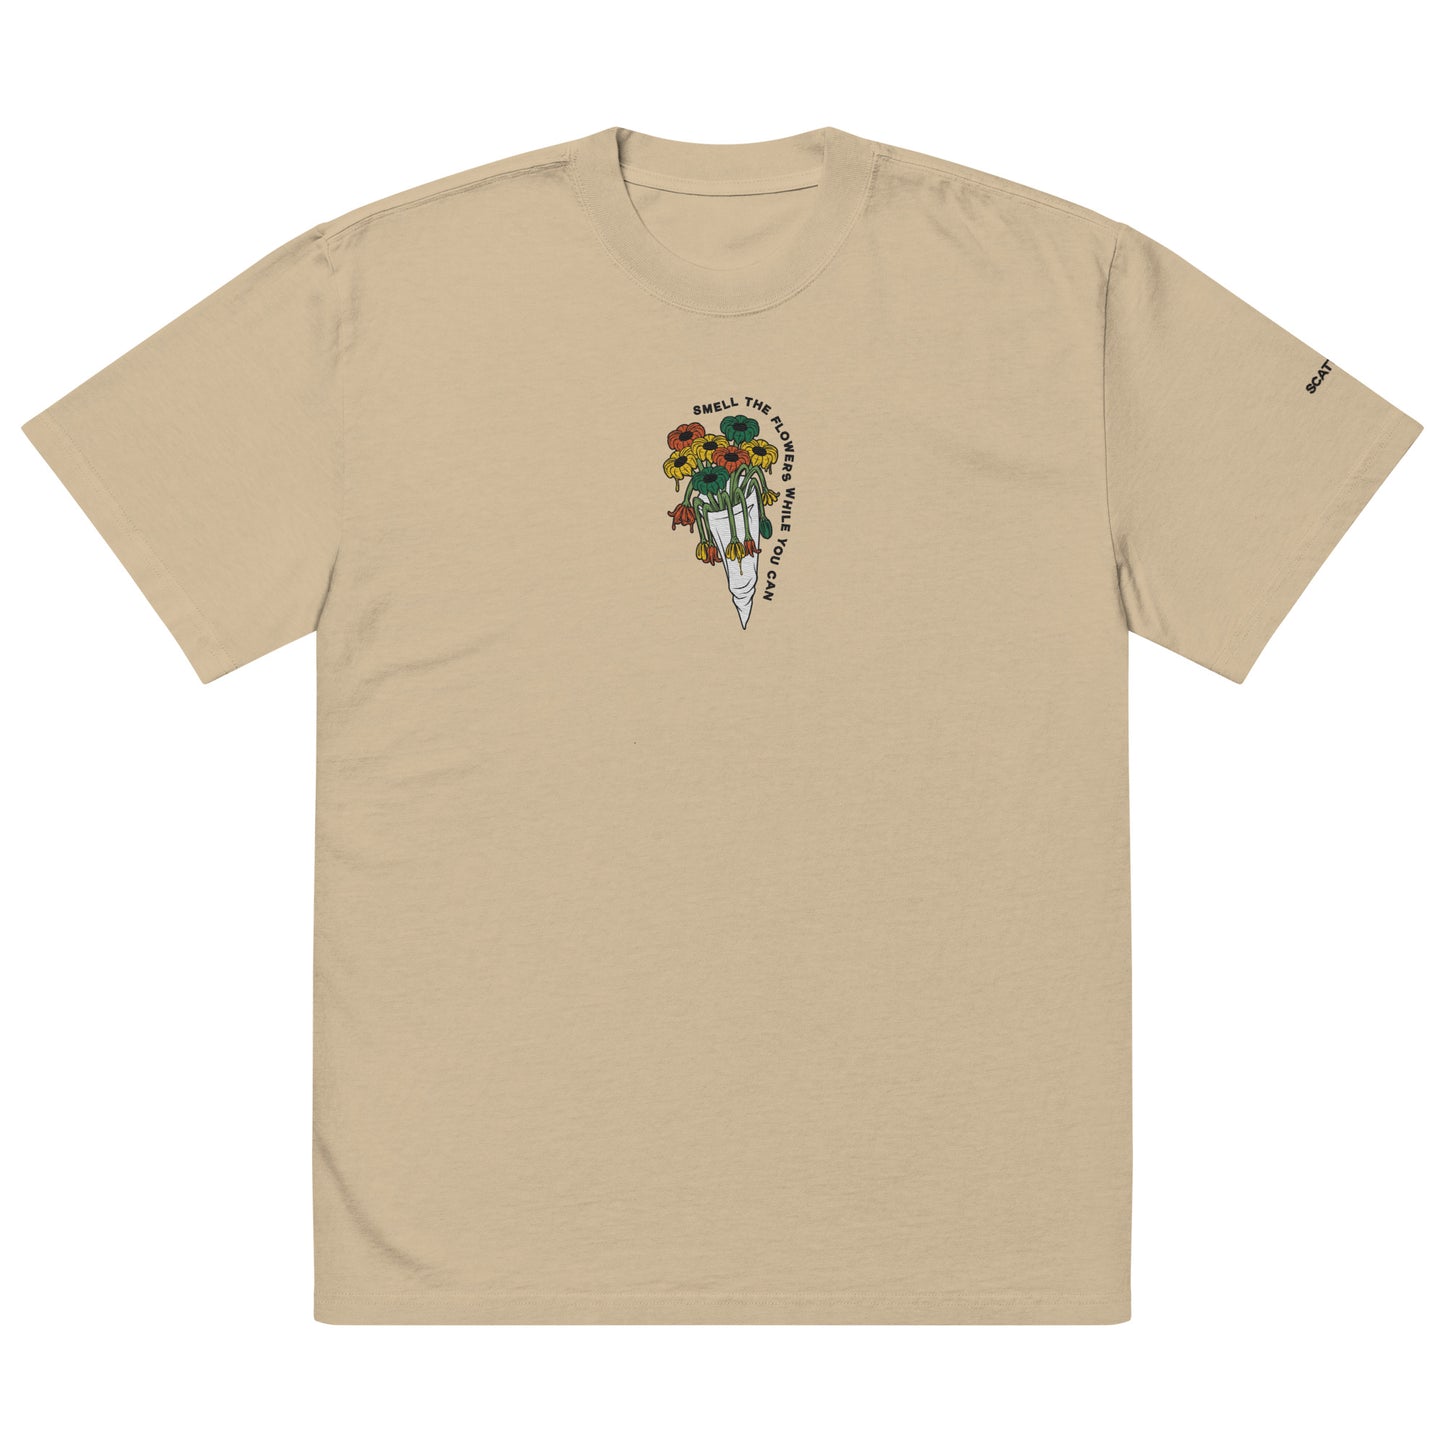 Scattered x Dripped Gawd Smell the Flowers Embroidered Faded T-shirt